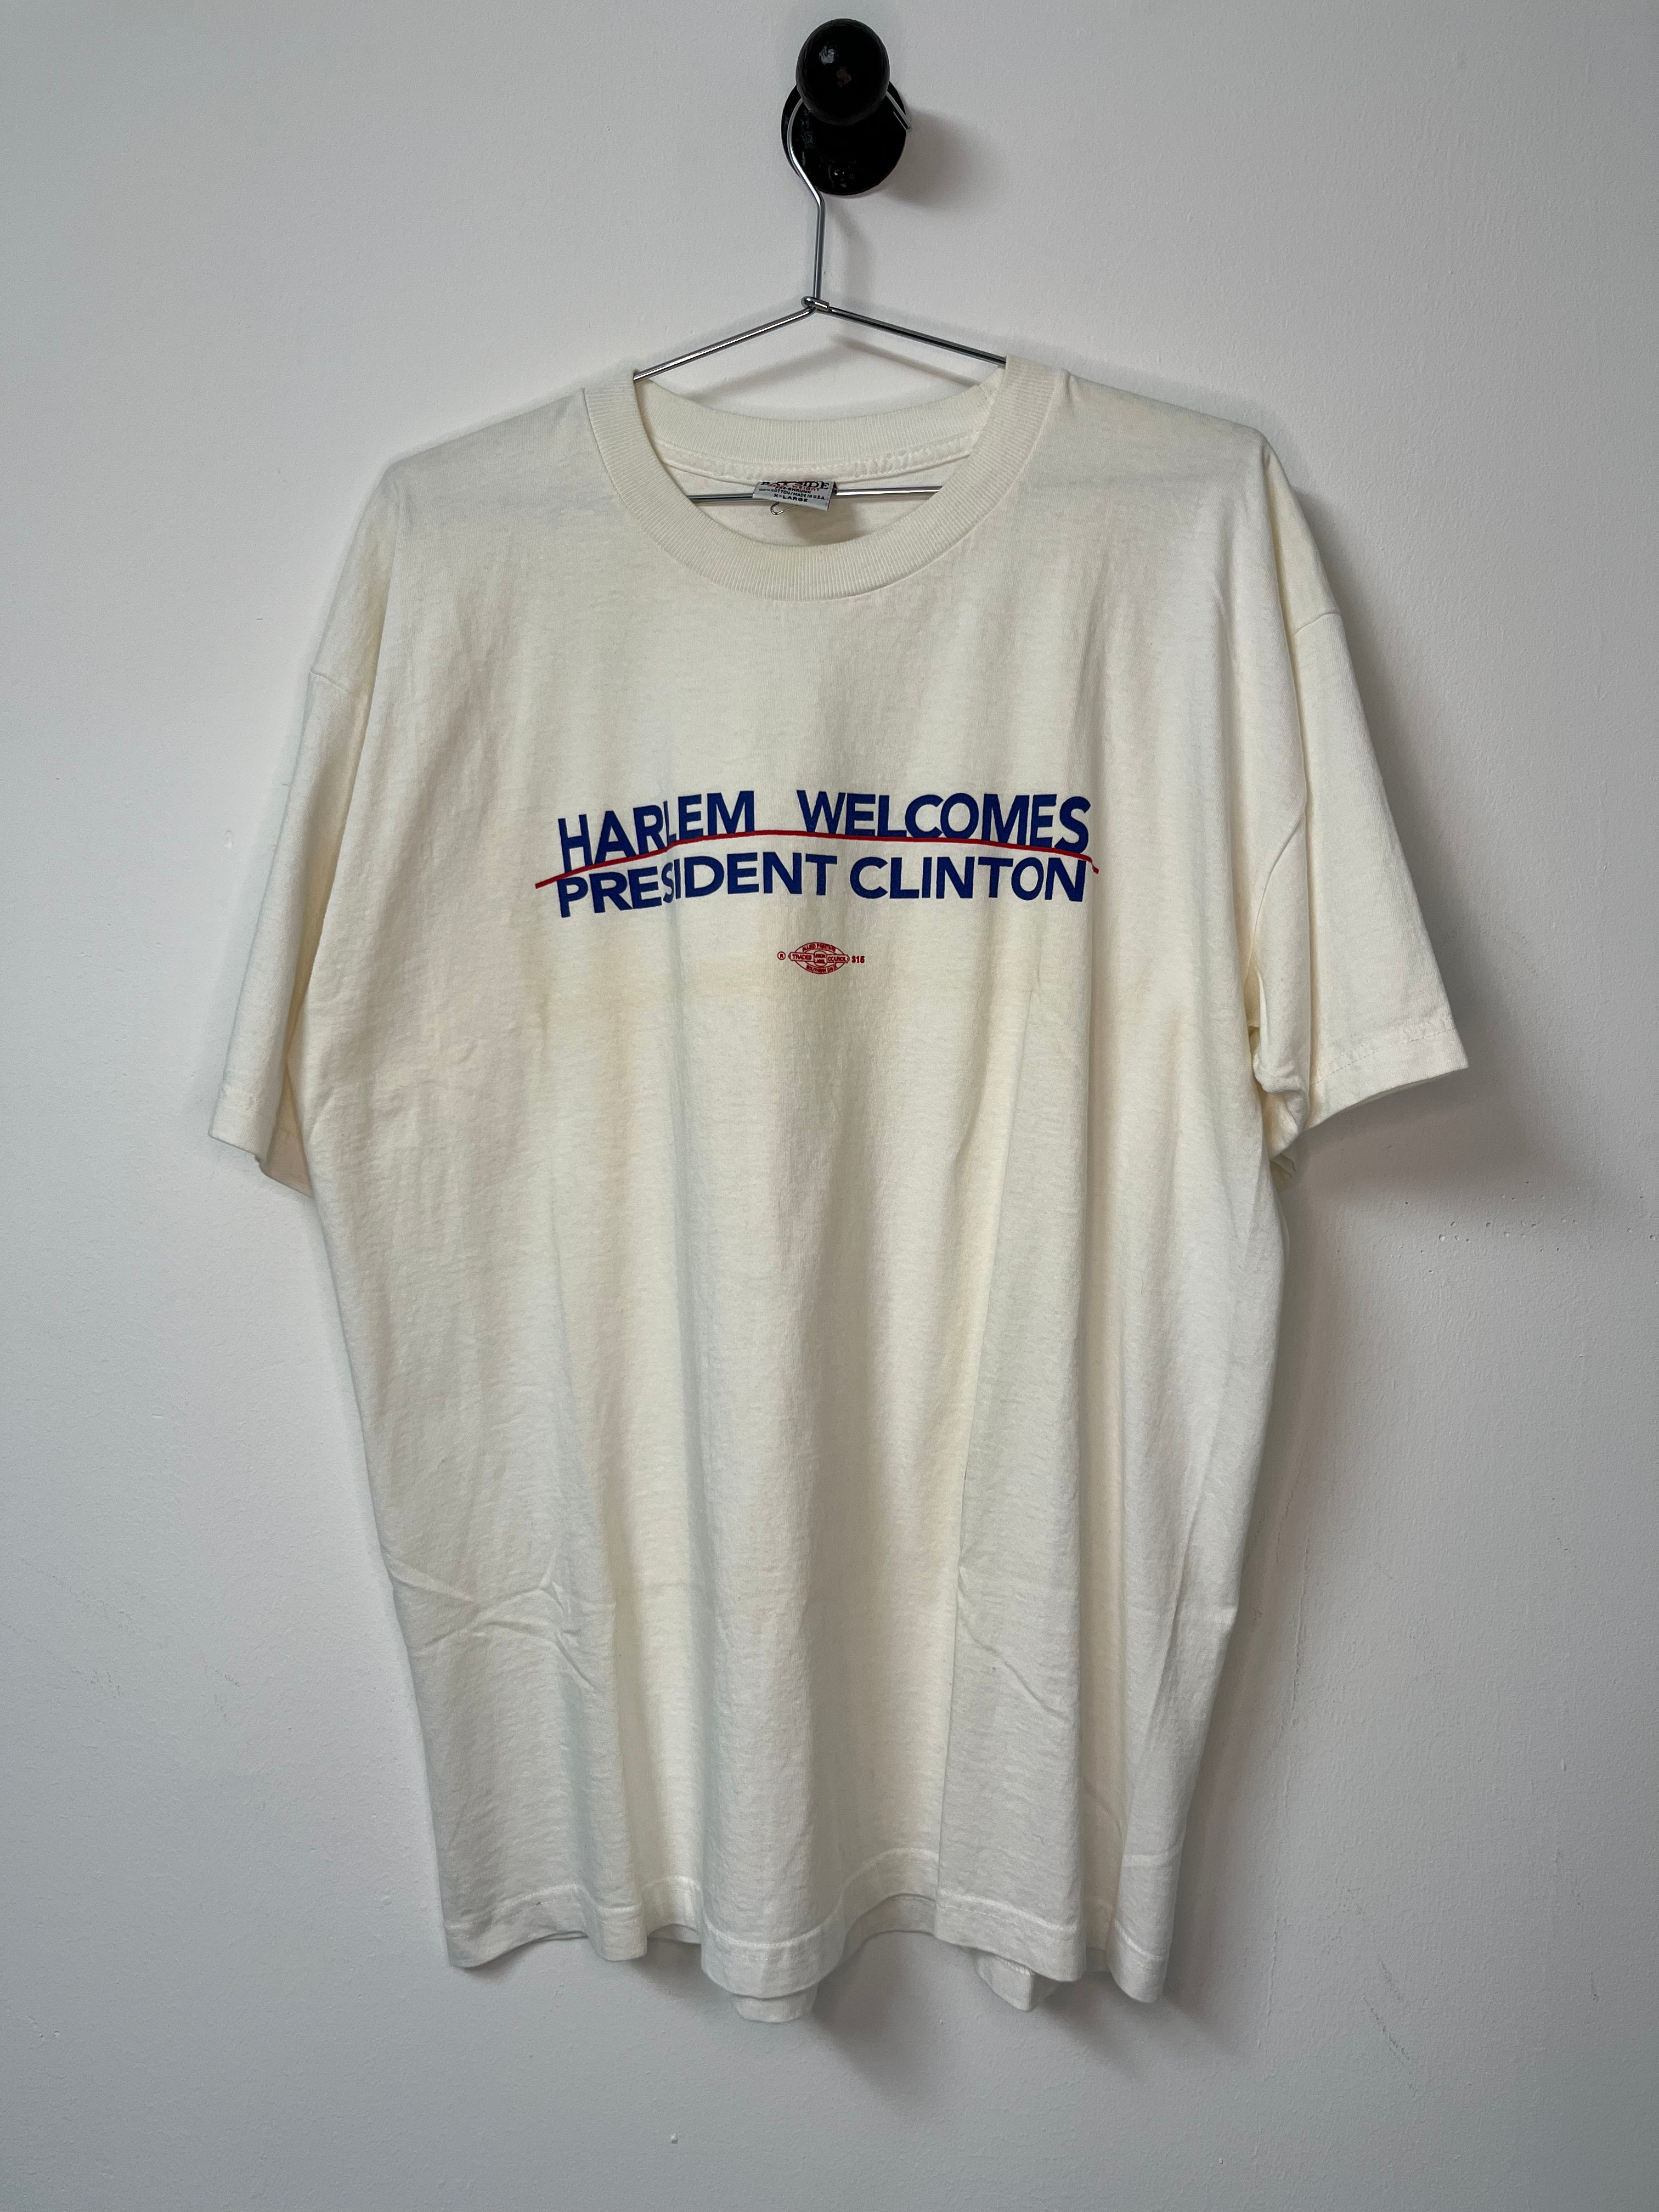 90s Harlem Welcomes President Clinton Campaign Tour T-Shirt - Aged White - XL